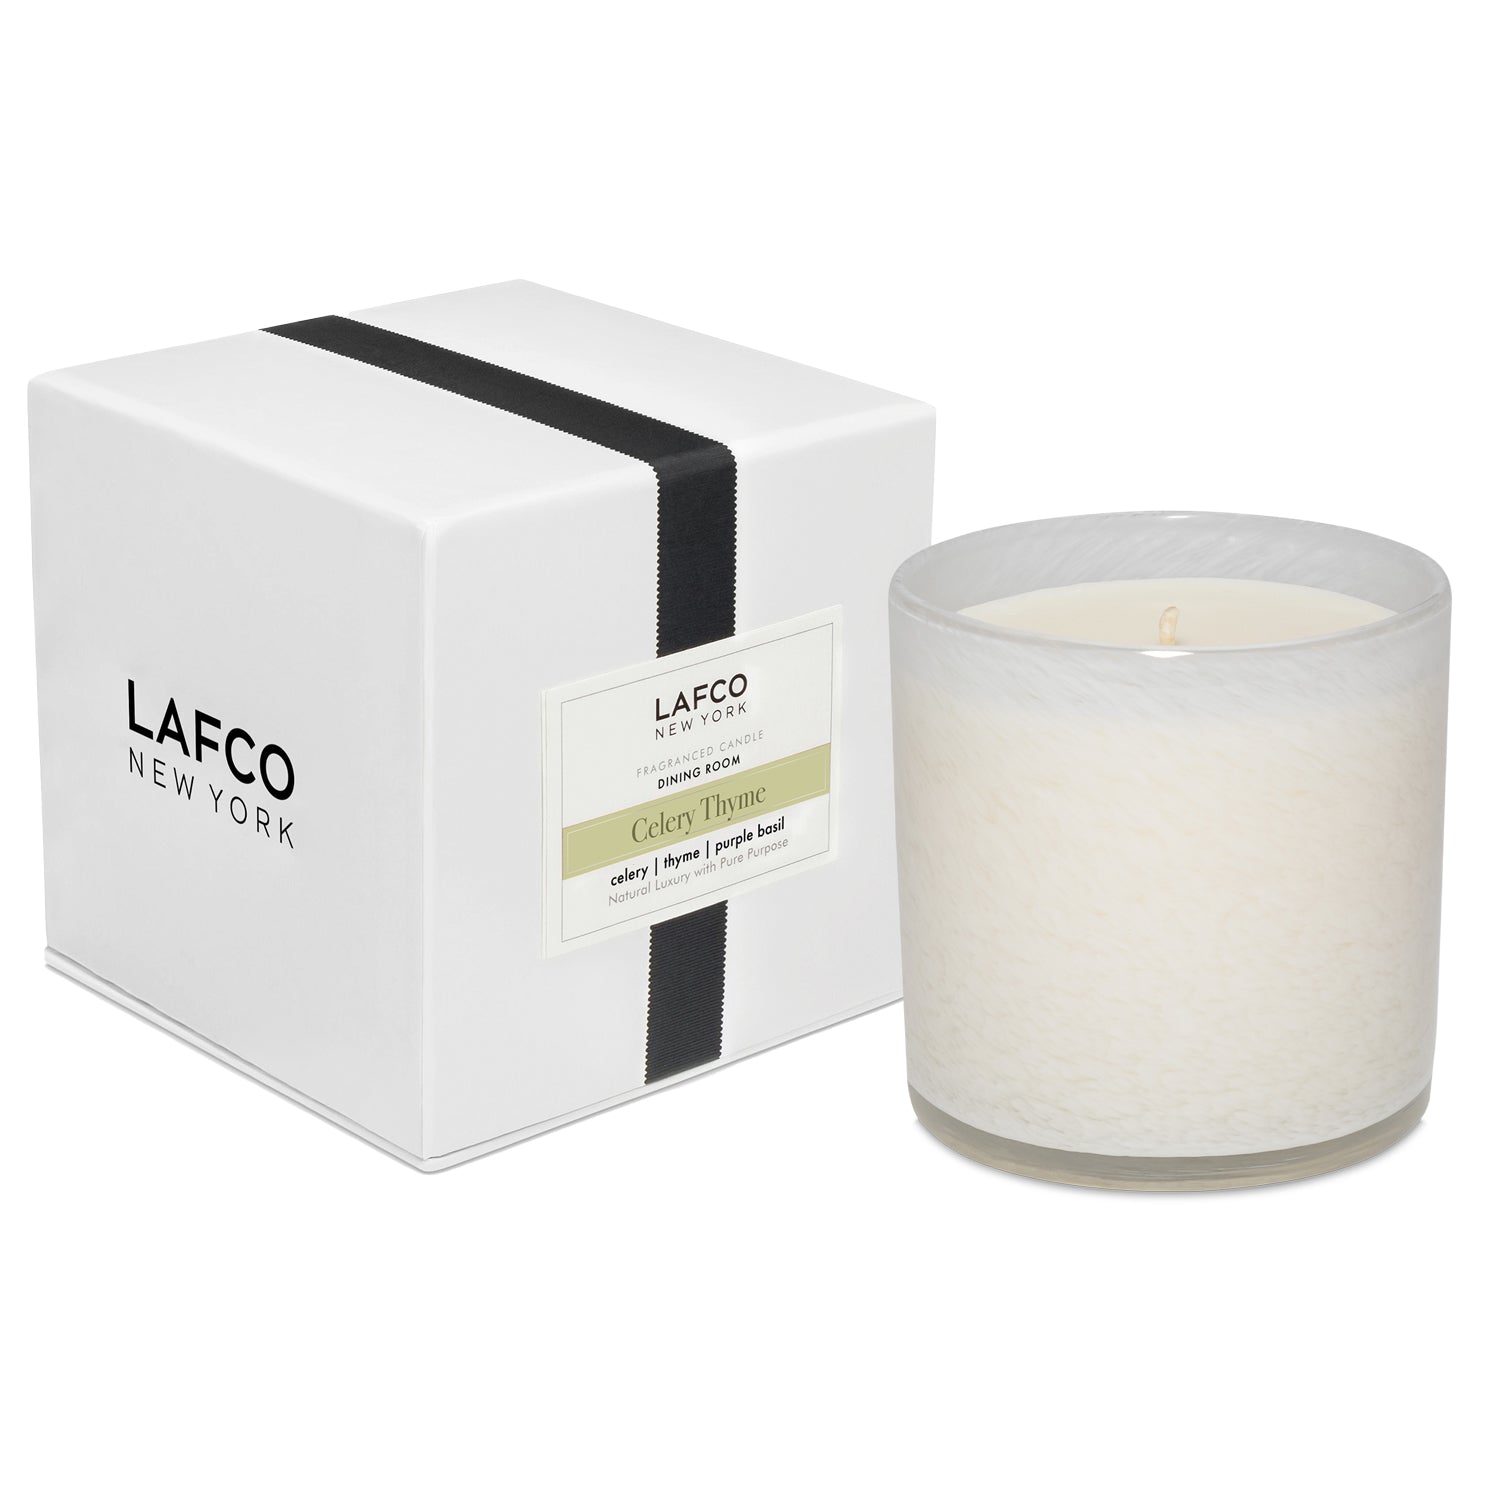 LAFCO 15.5 oz Dining Room (Celery Thyme) Candle